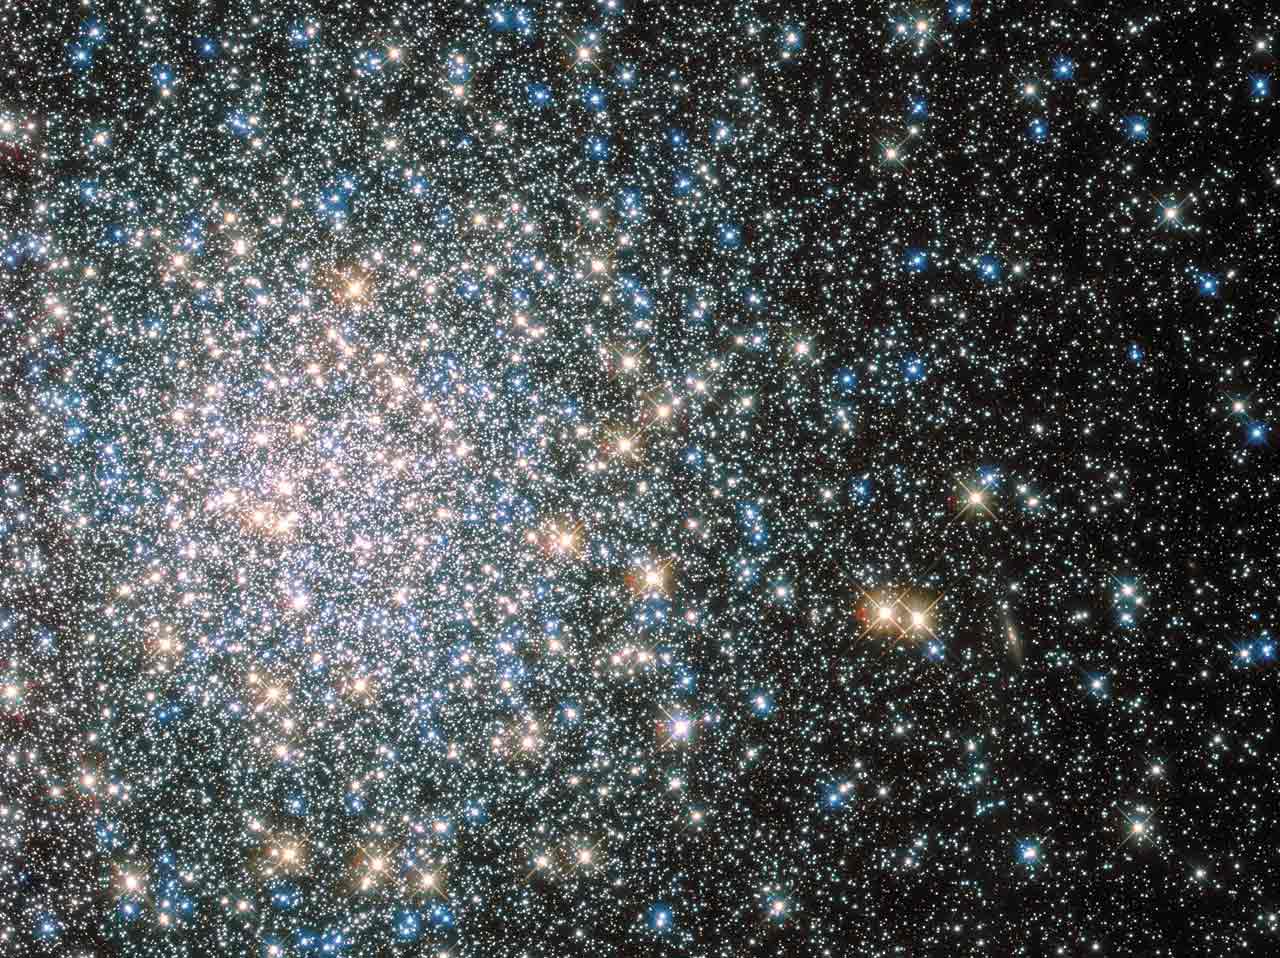 A cluster of stars in space